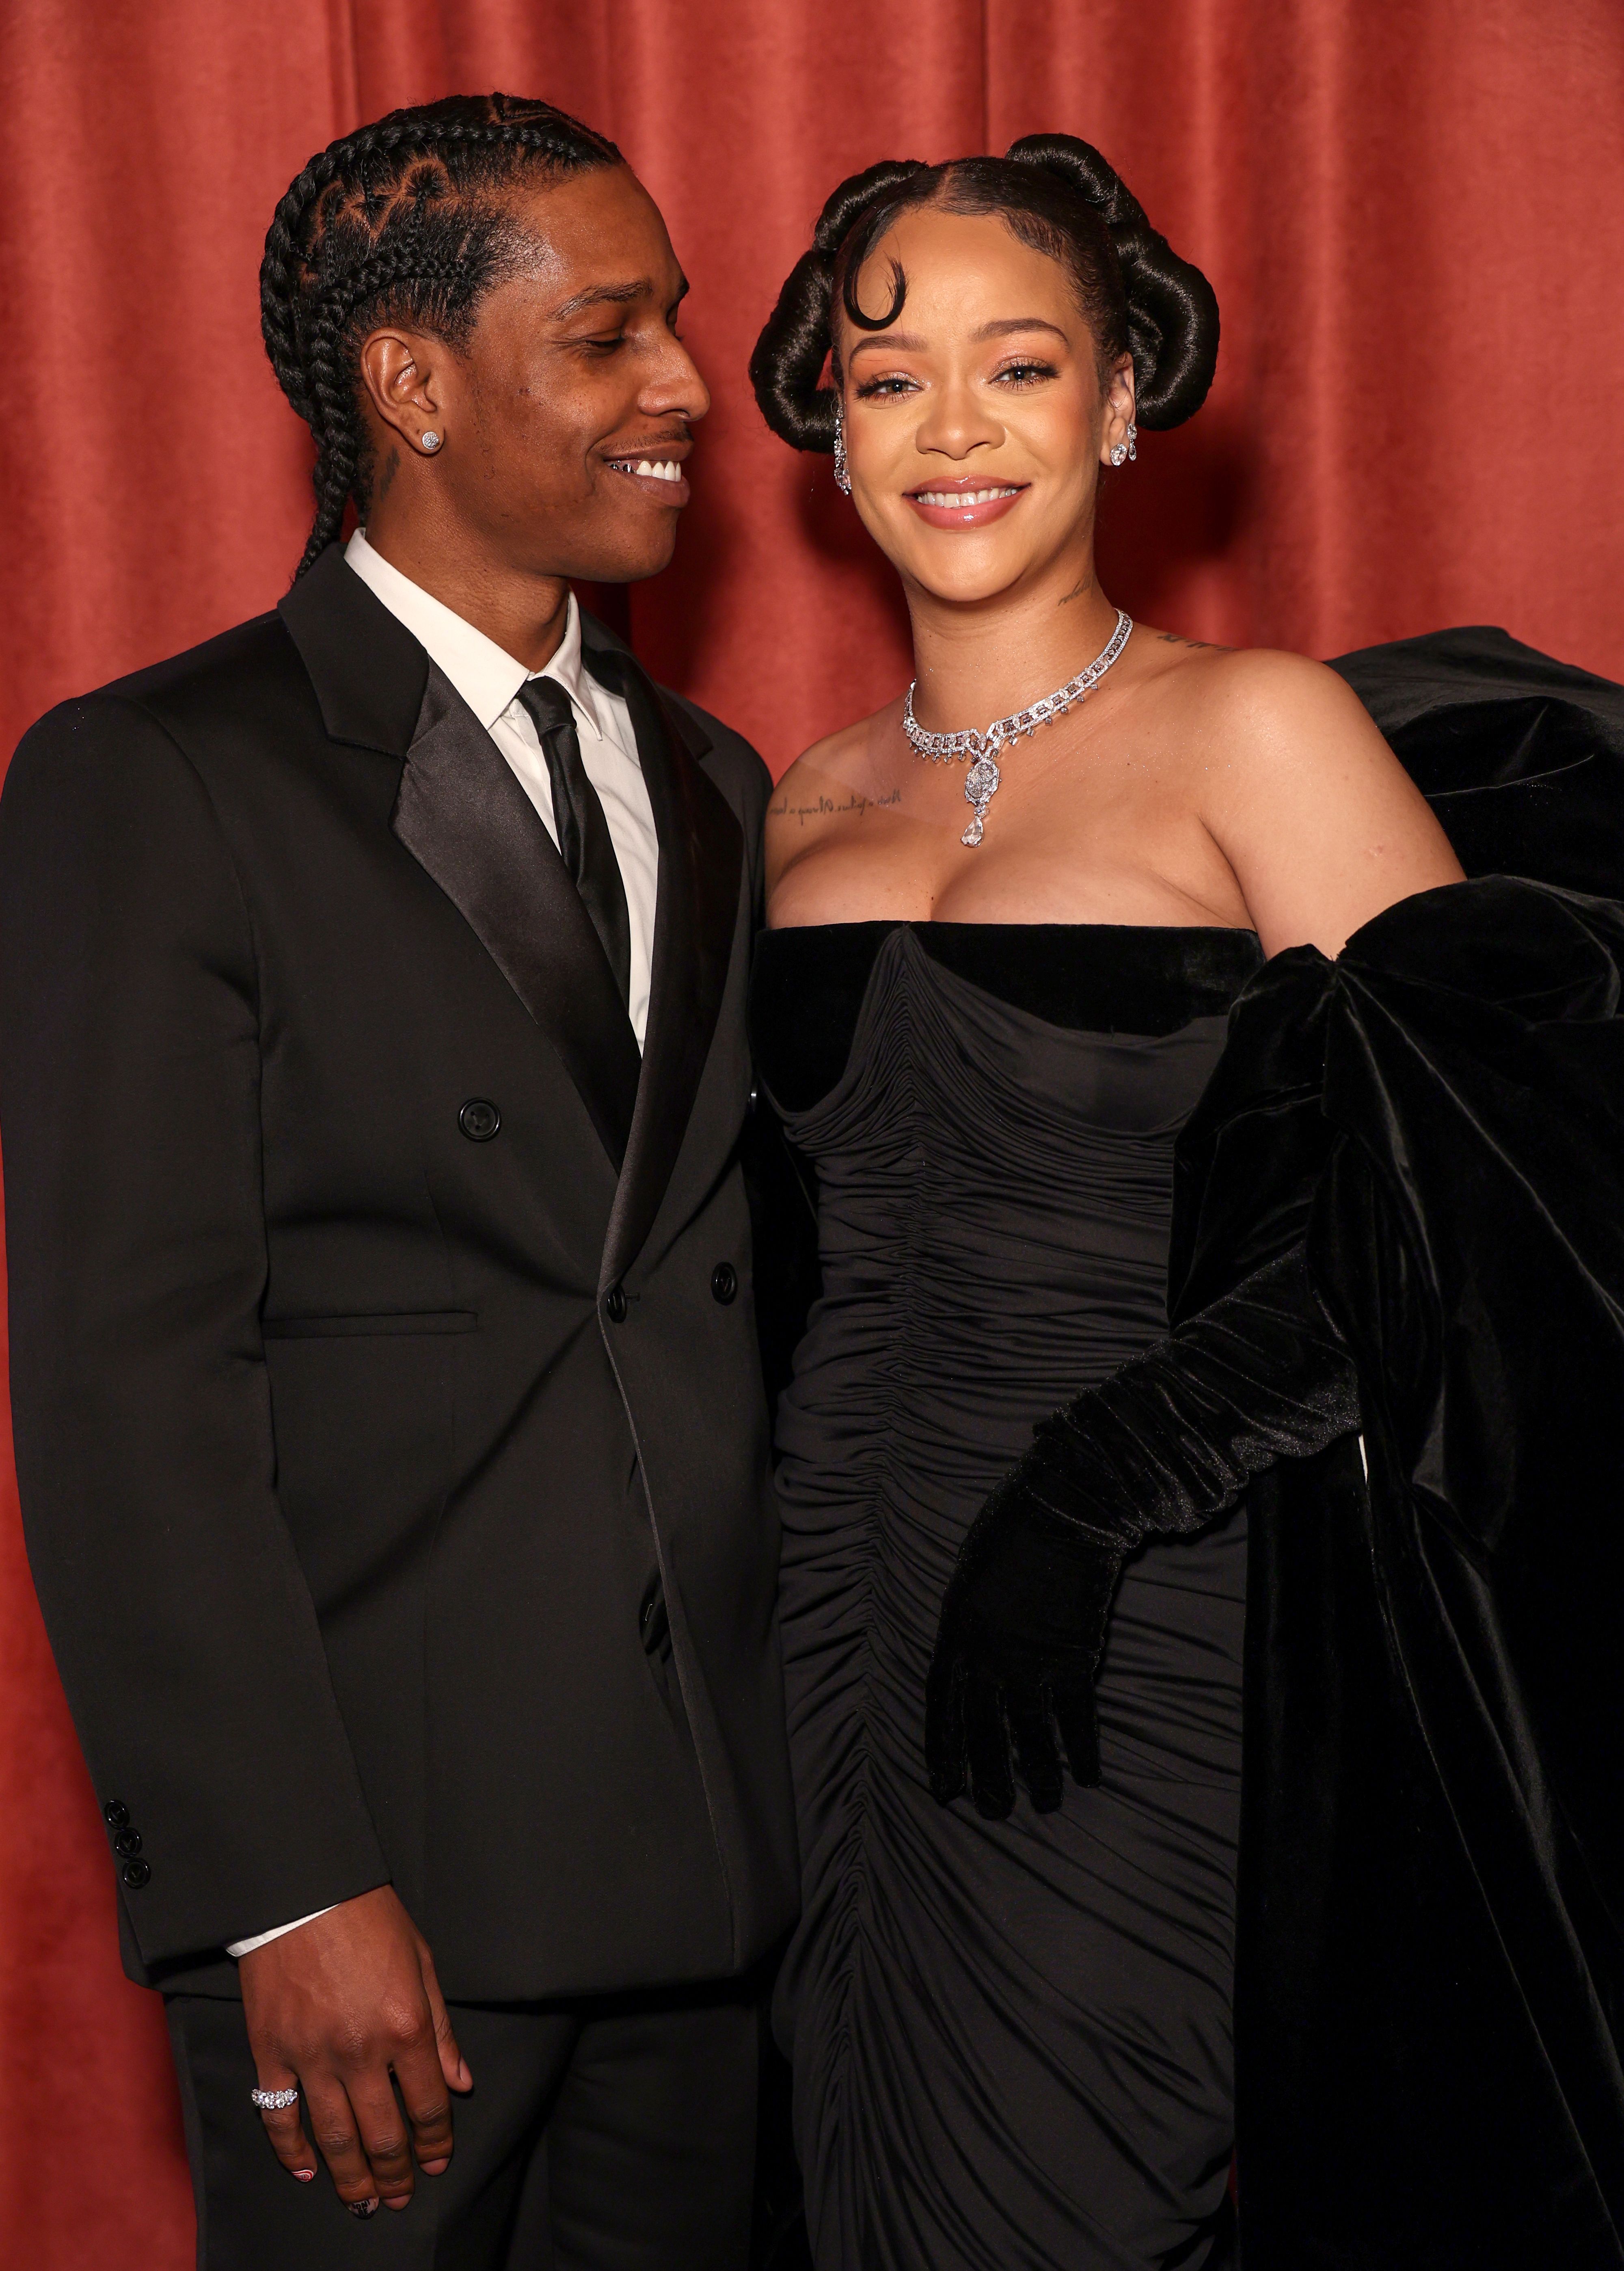 Rihanna And A$AP Rocky's Entire Relationship Timeline - SHEfinds